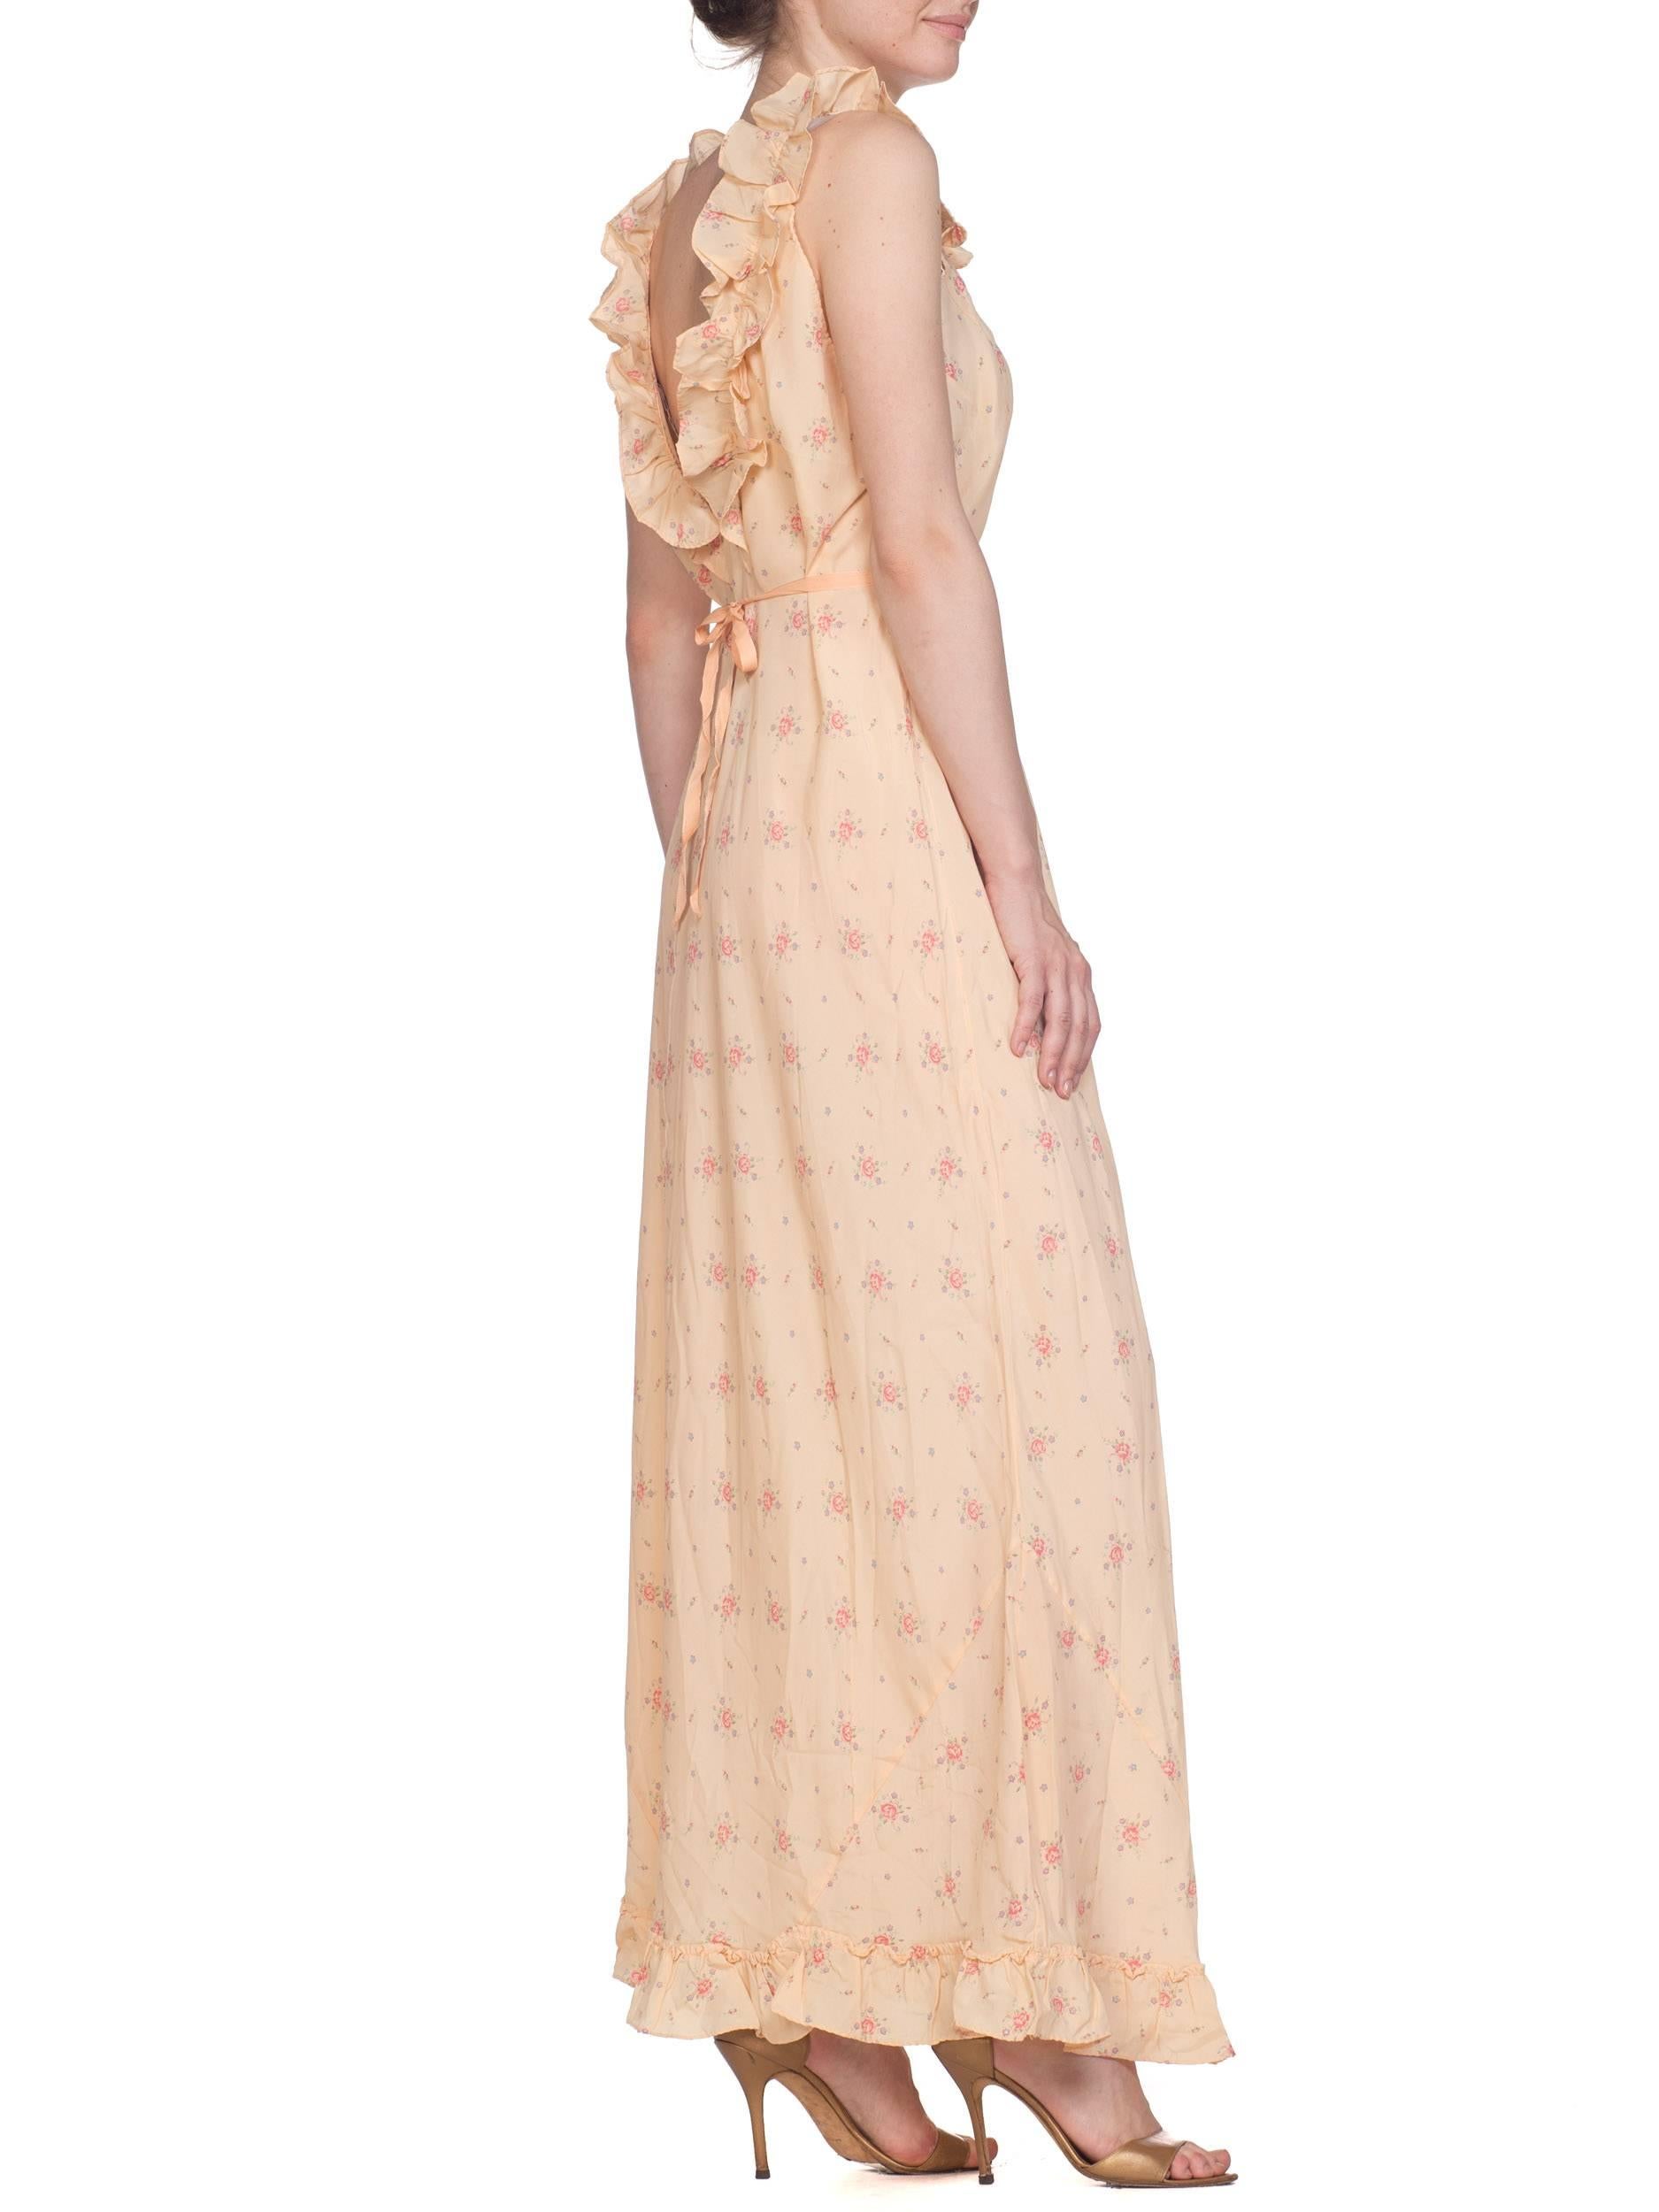 1940S Peach Bias Cut Silk Floral  Negligee With Low Ruffle Back & Waist Ties 1